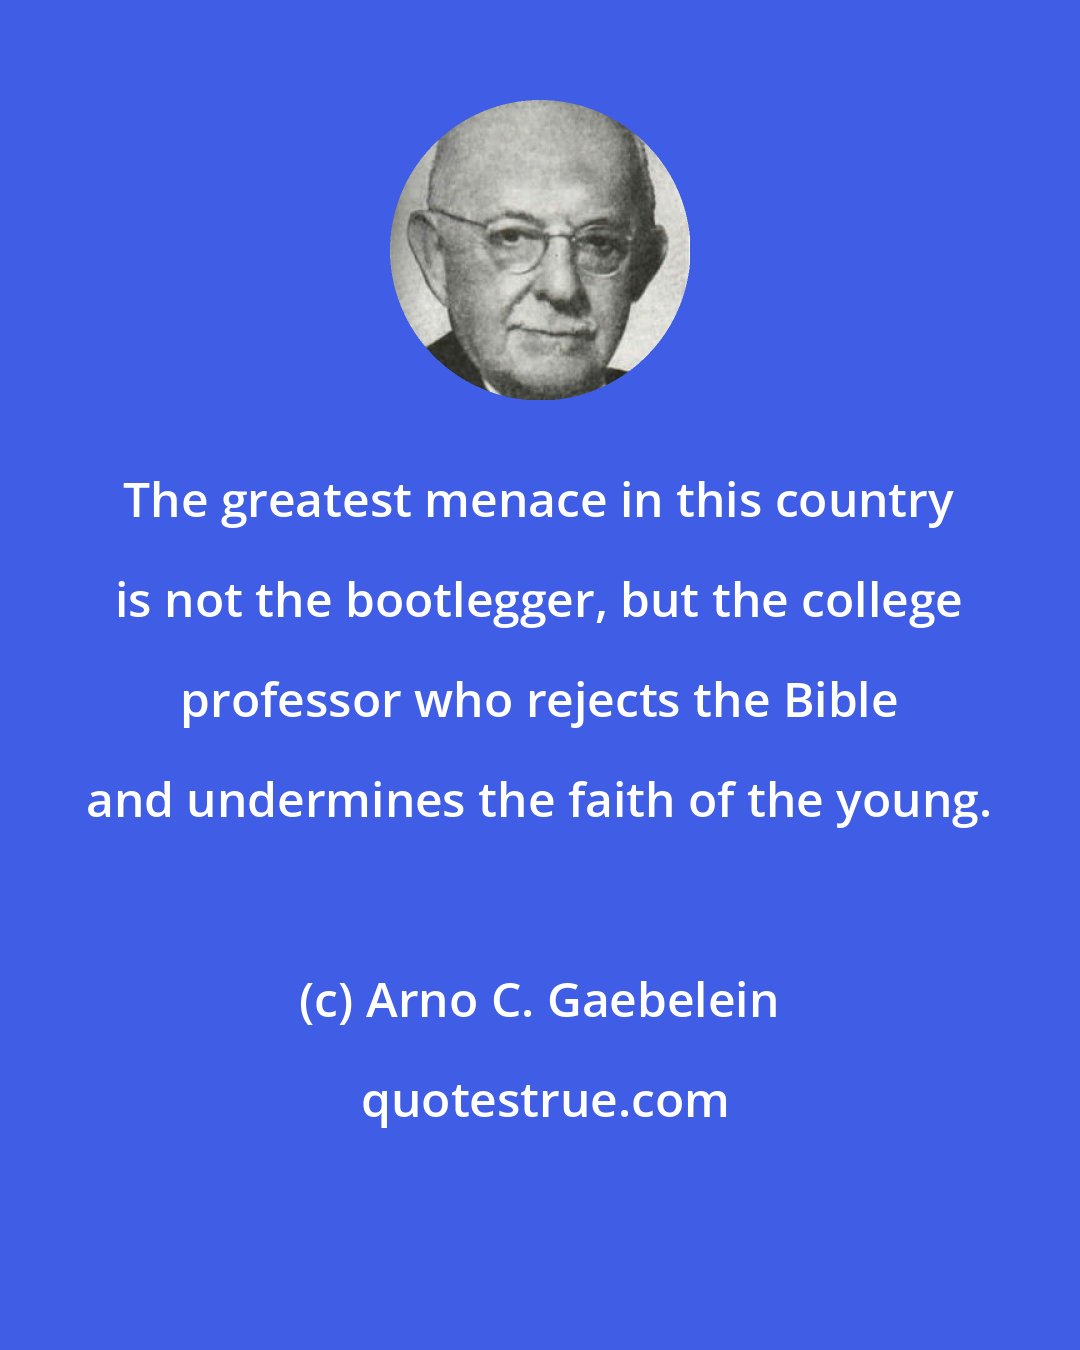 Arno C. Gaebelein: The greatest menace in this country is not the bootlegger, but the college professor who rejects the Bible and undermines the faith of the young.